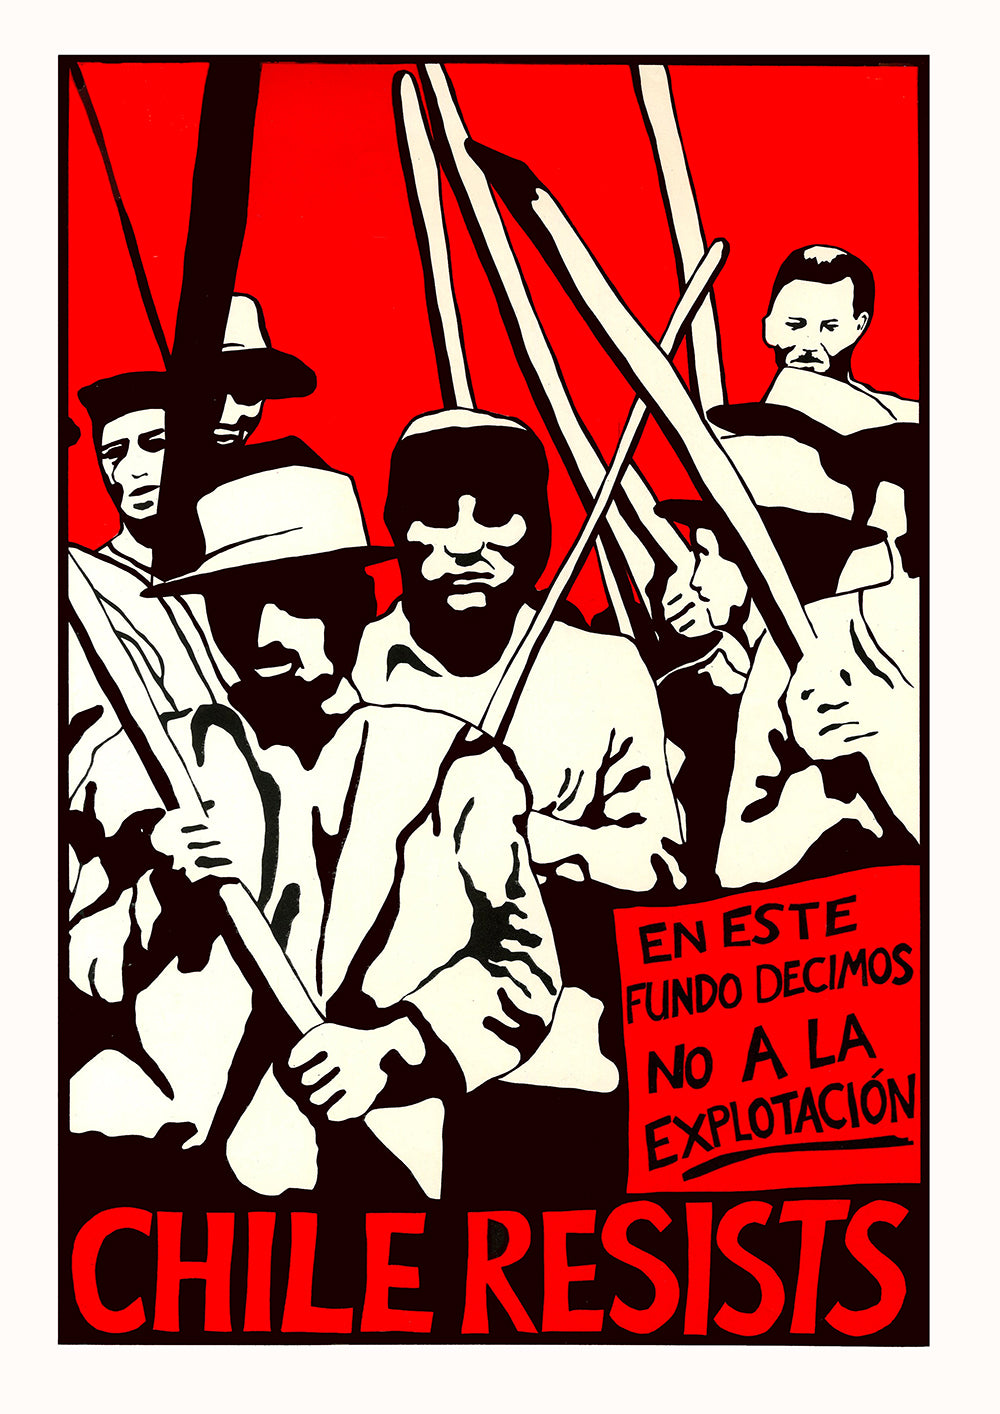 Chile resists - British poster